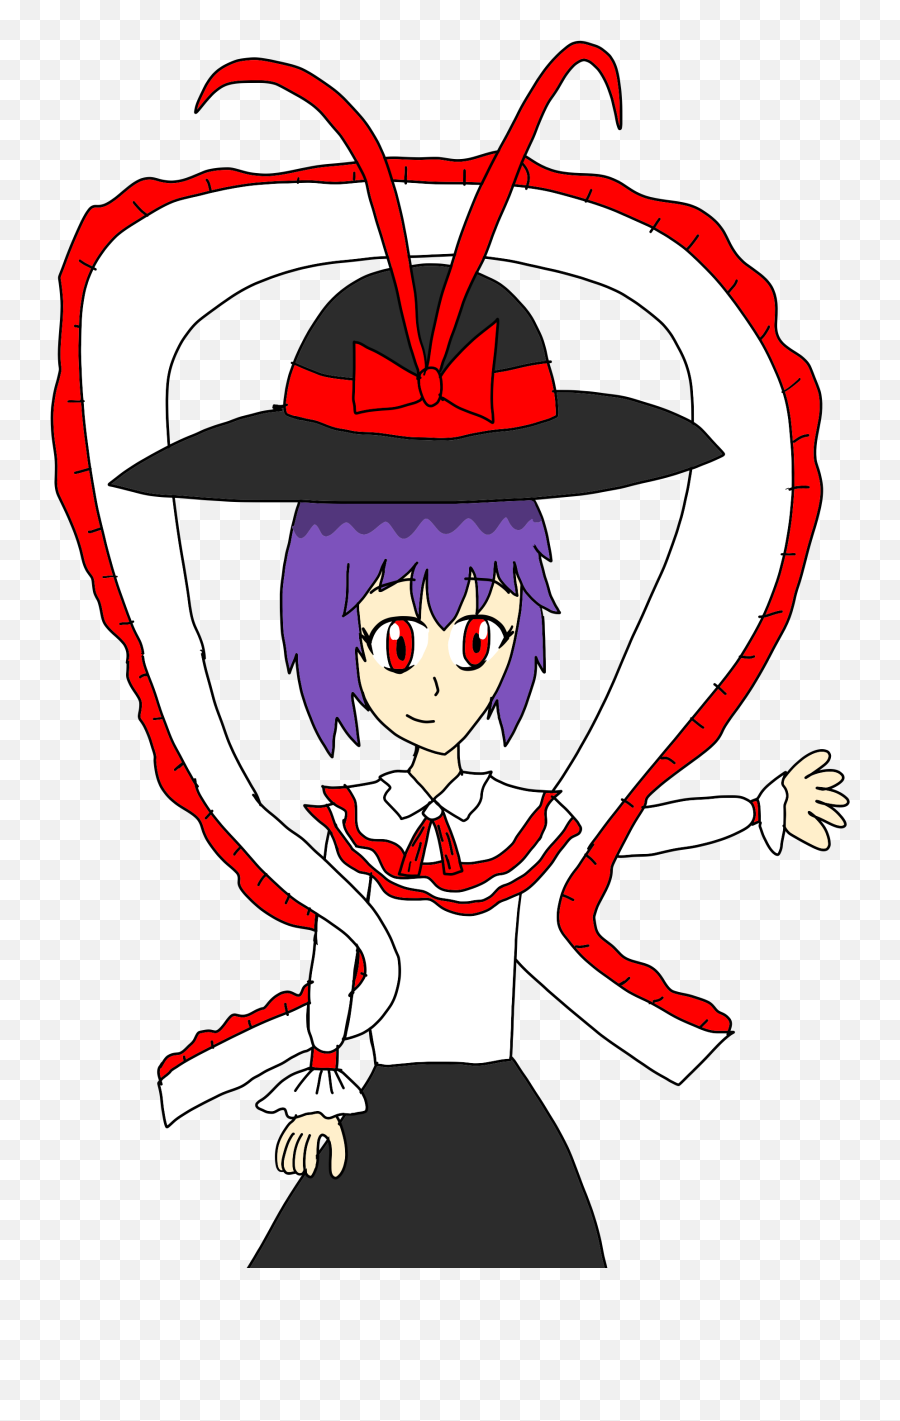 Drawing Every Character From Touhou 6 - 175 Then 15 47th Fictional Character Emoji,Insanity Emotion Drawings